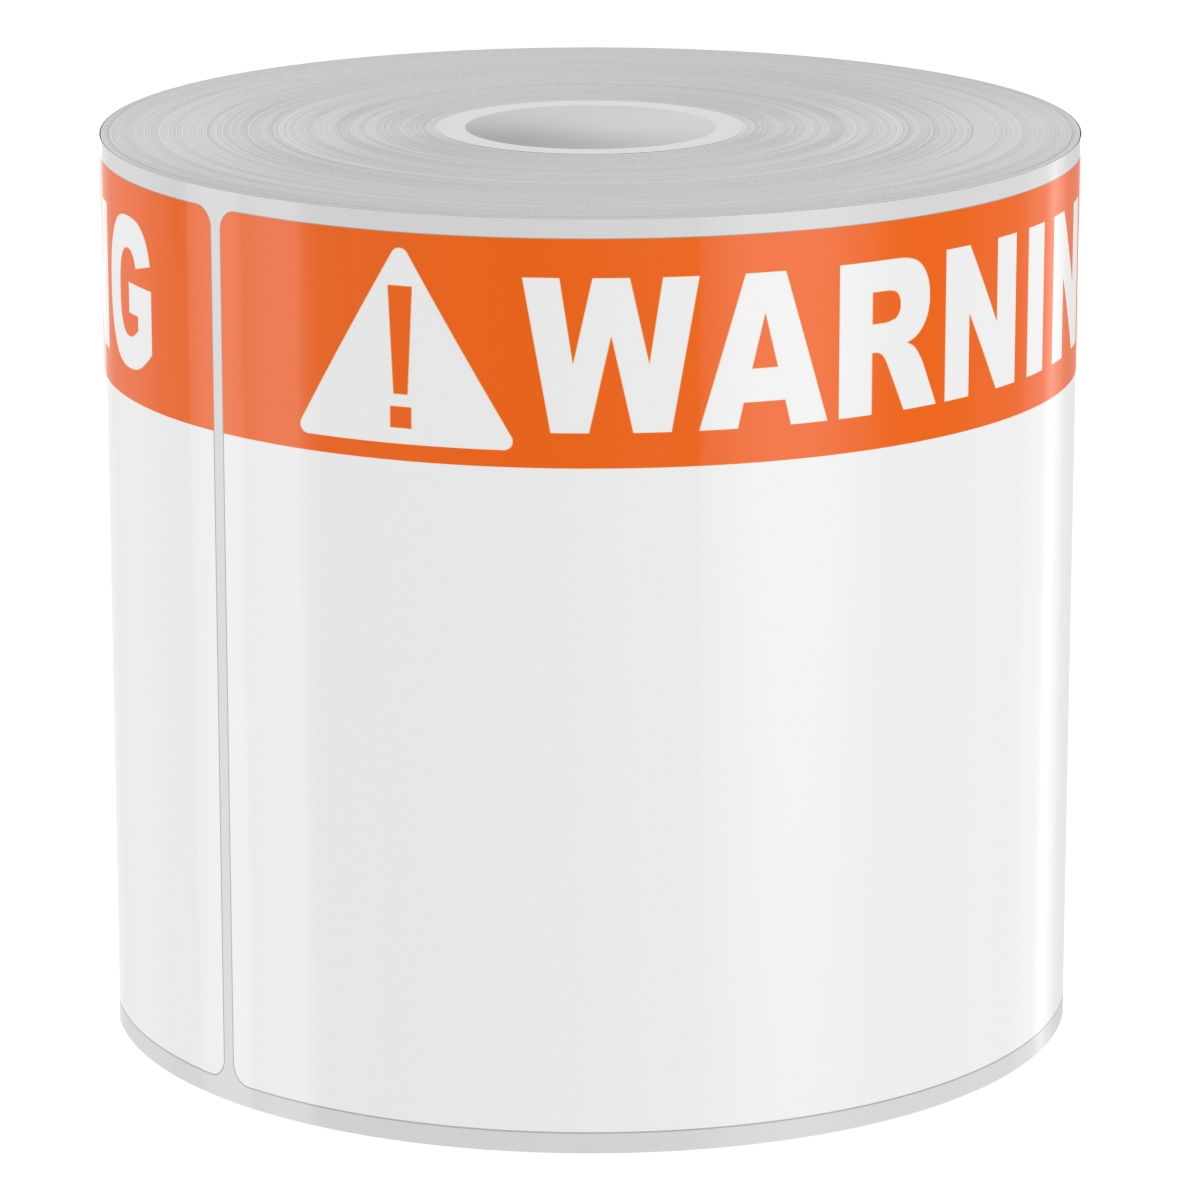 Detail view for 250 4" x 6" High-Performance Arc Flash Labels White Warning on Orange Header